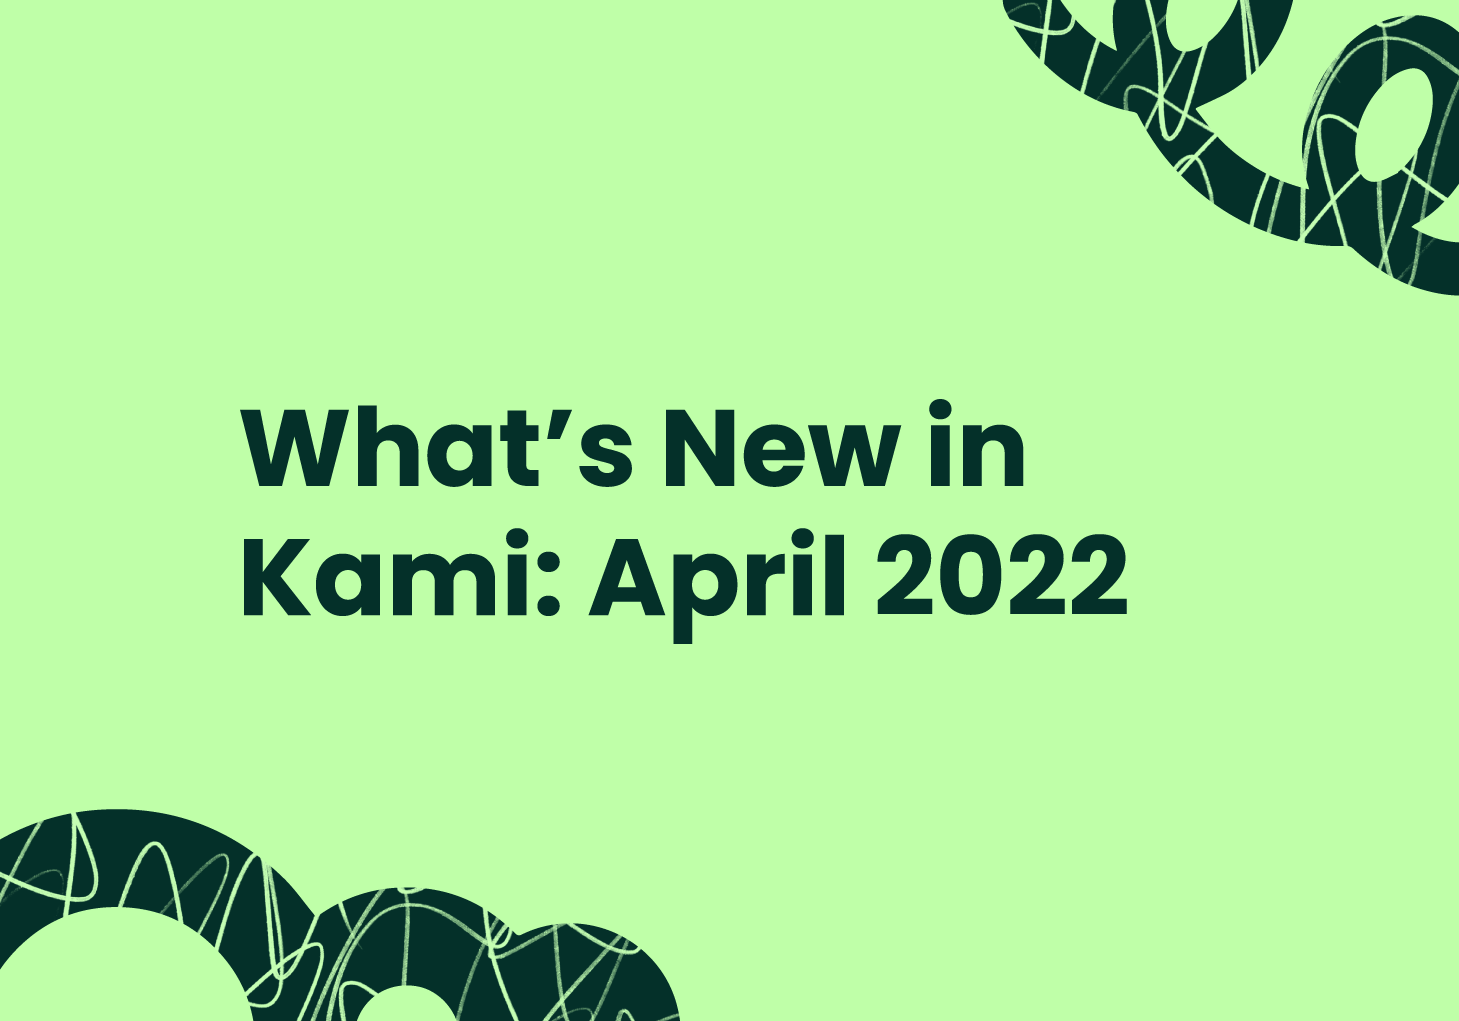 What's New in Kami: April 2022